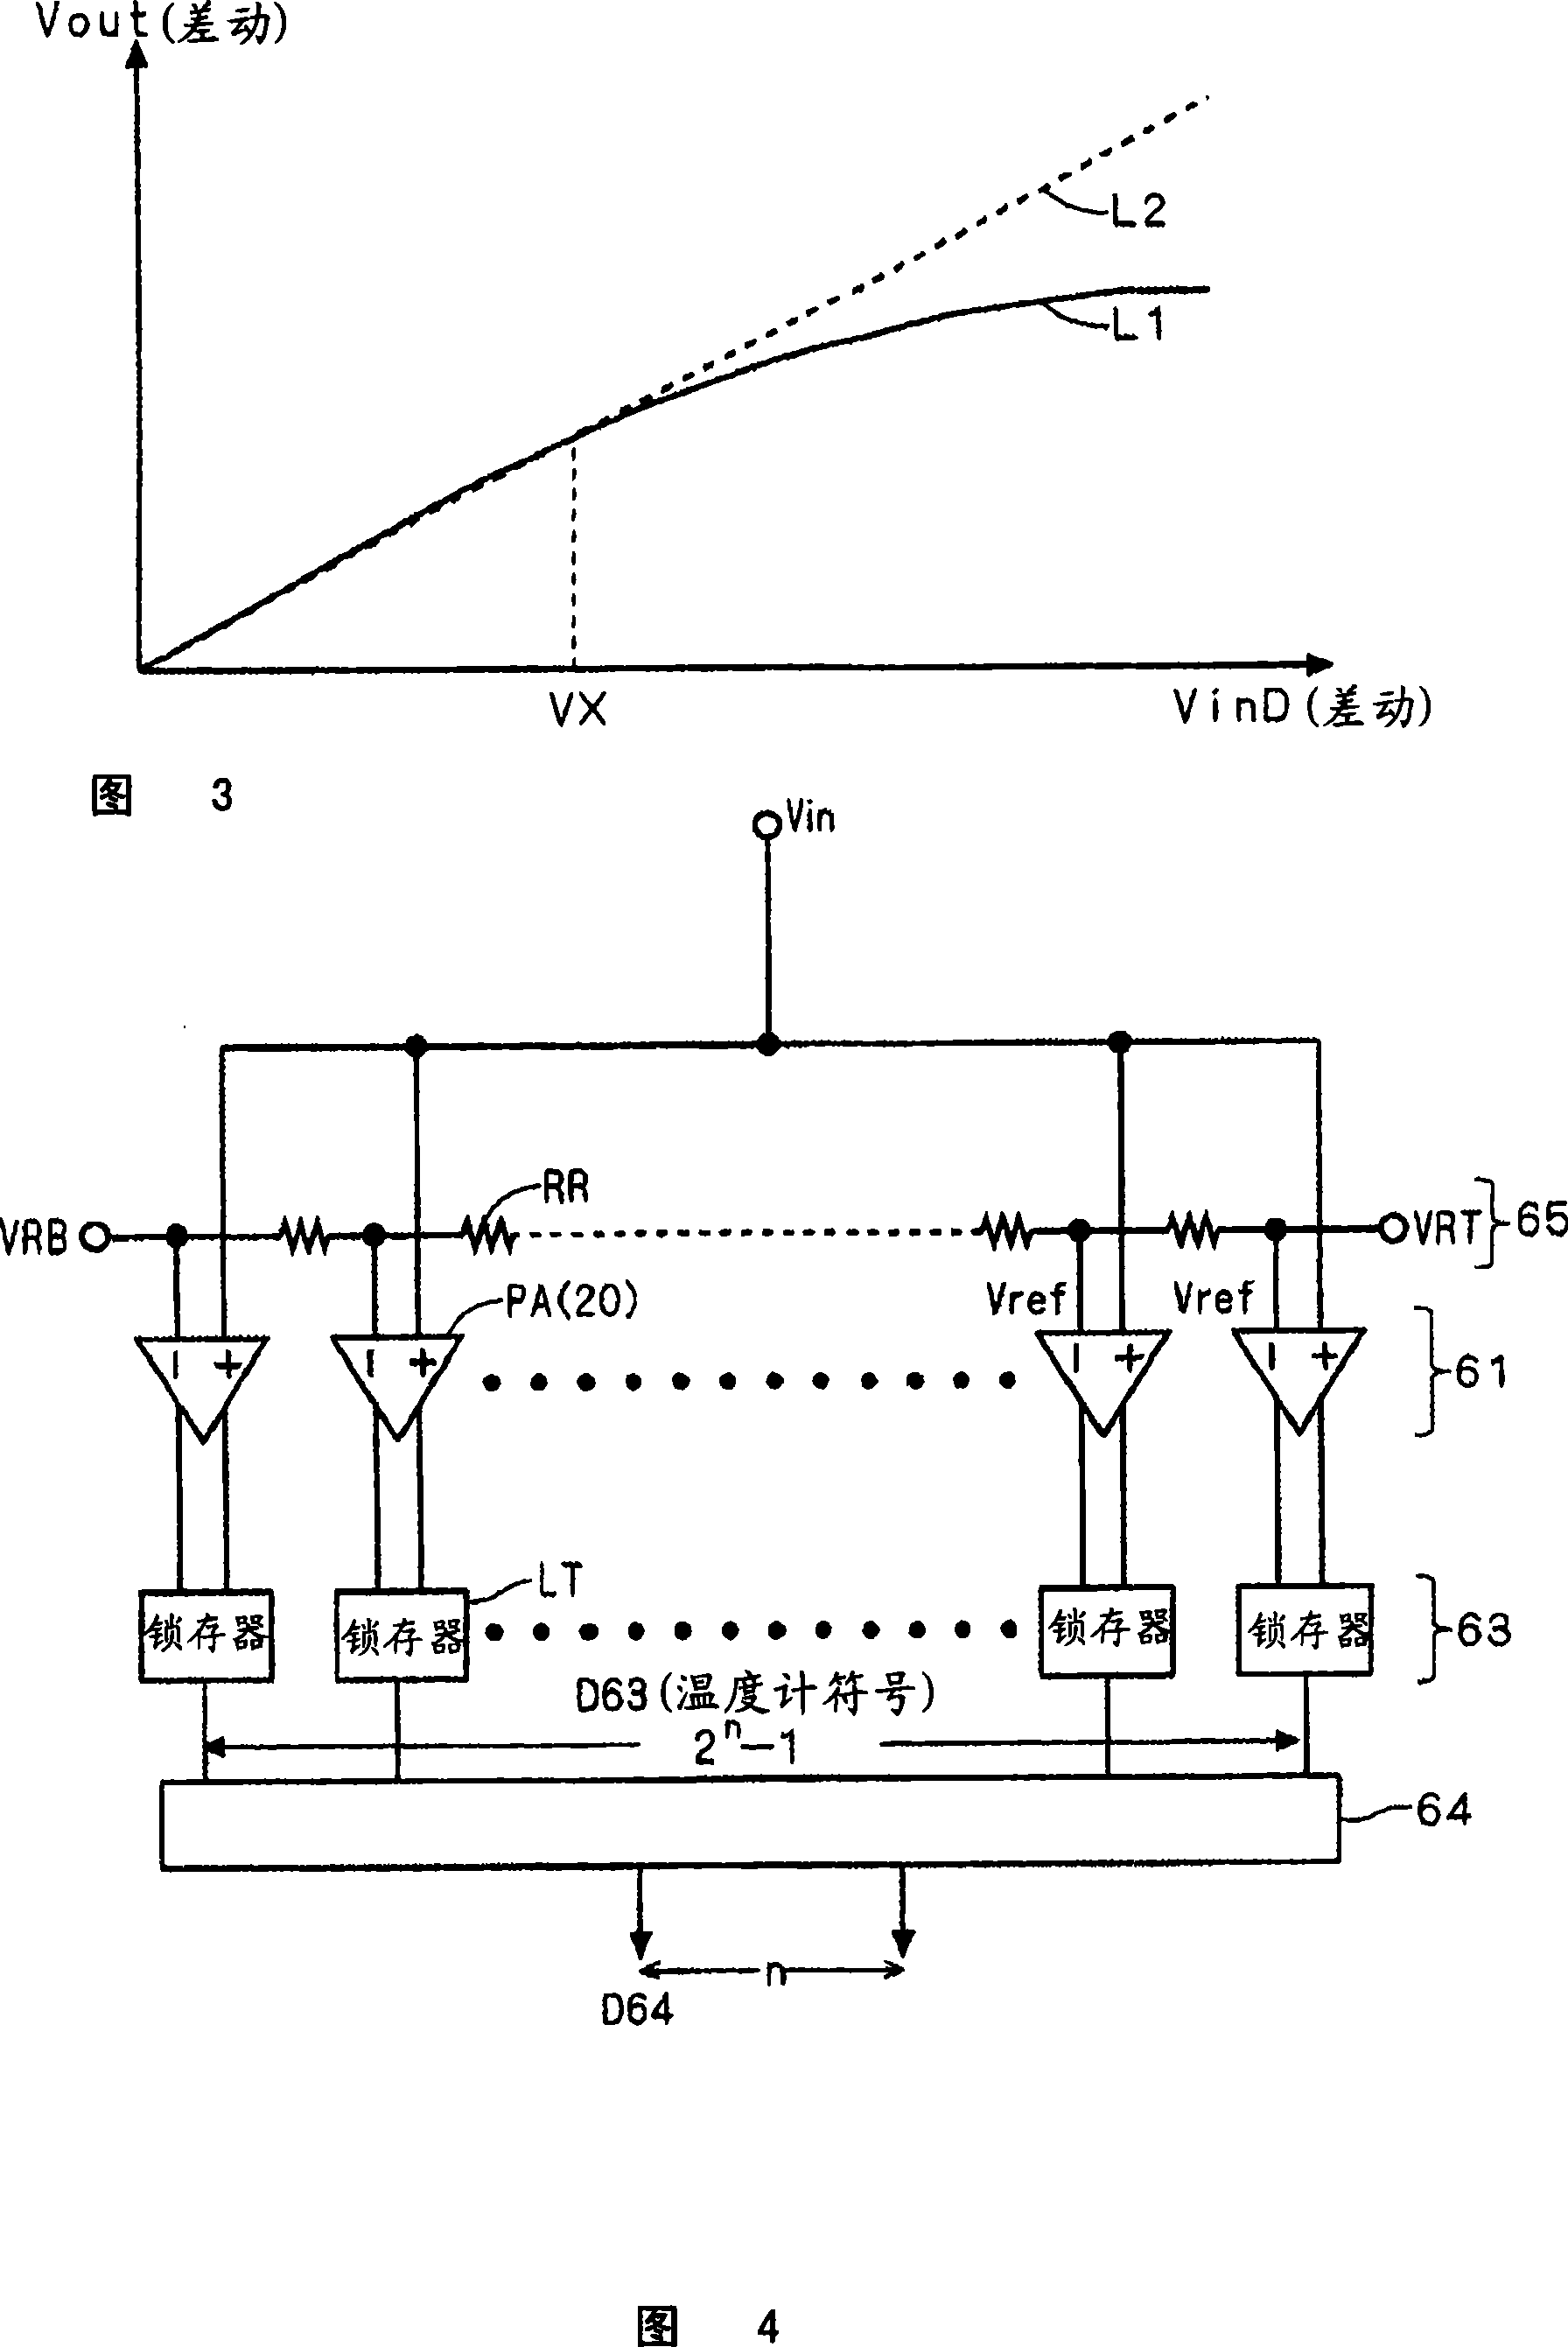 Differential amplifier circuit and A/D converter